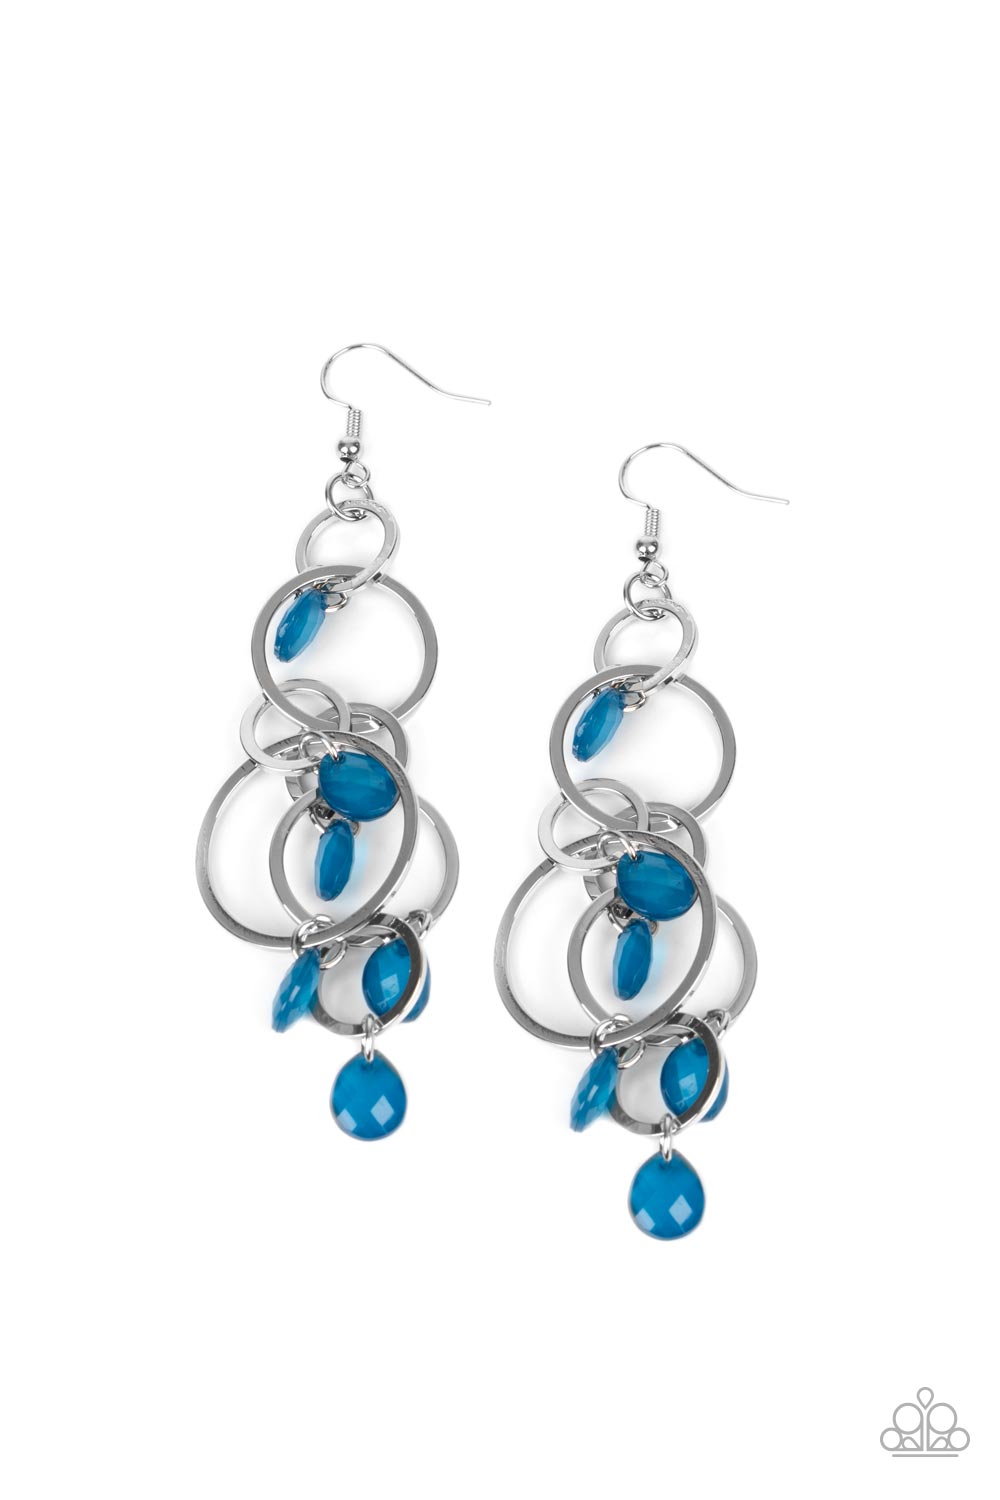 Dizzyingly Dreamy - Mykonos Blue and Silver Teardrop Earrings - Paparazzi Accessories - Opaque Mykonos Blue teardrops sporadically cascade from an assortment of mismatched silver links, resulting in a whimsically tasseled chandelier. Earring attaches to a standard fishhook fitting.